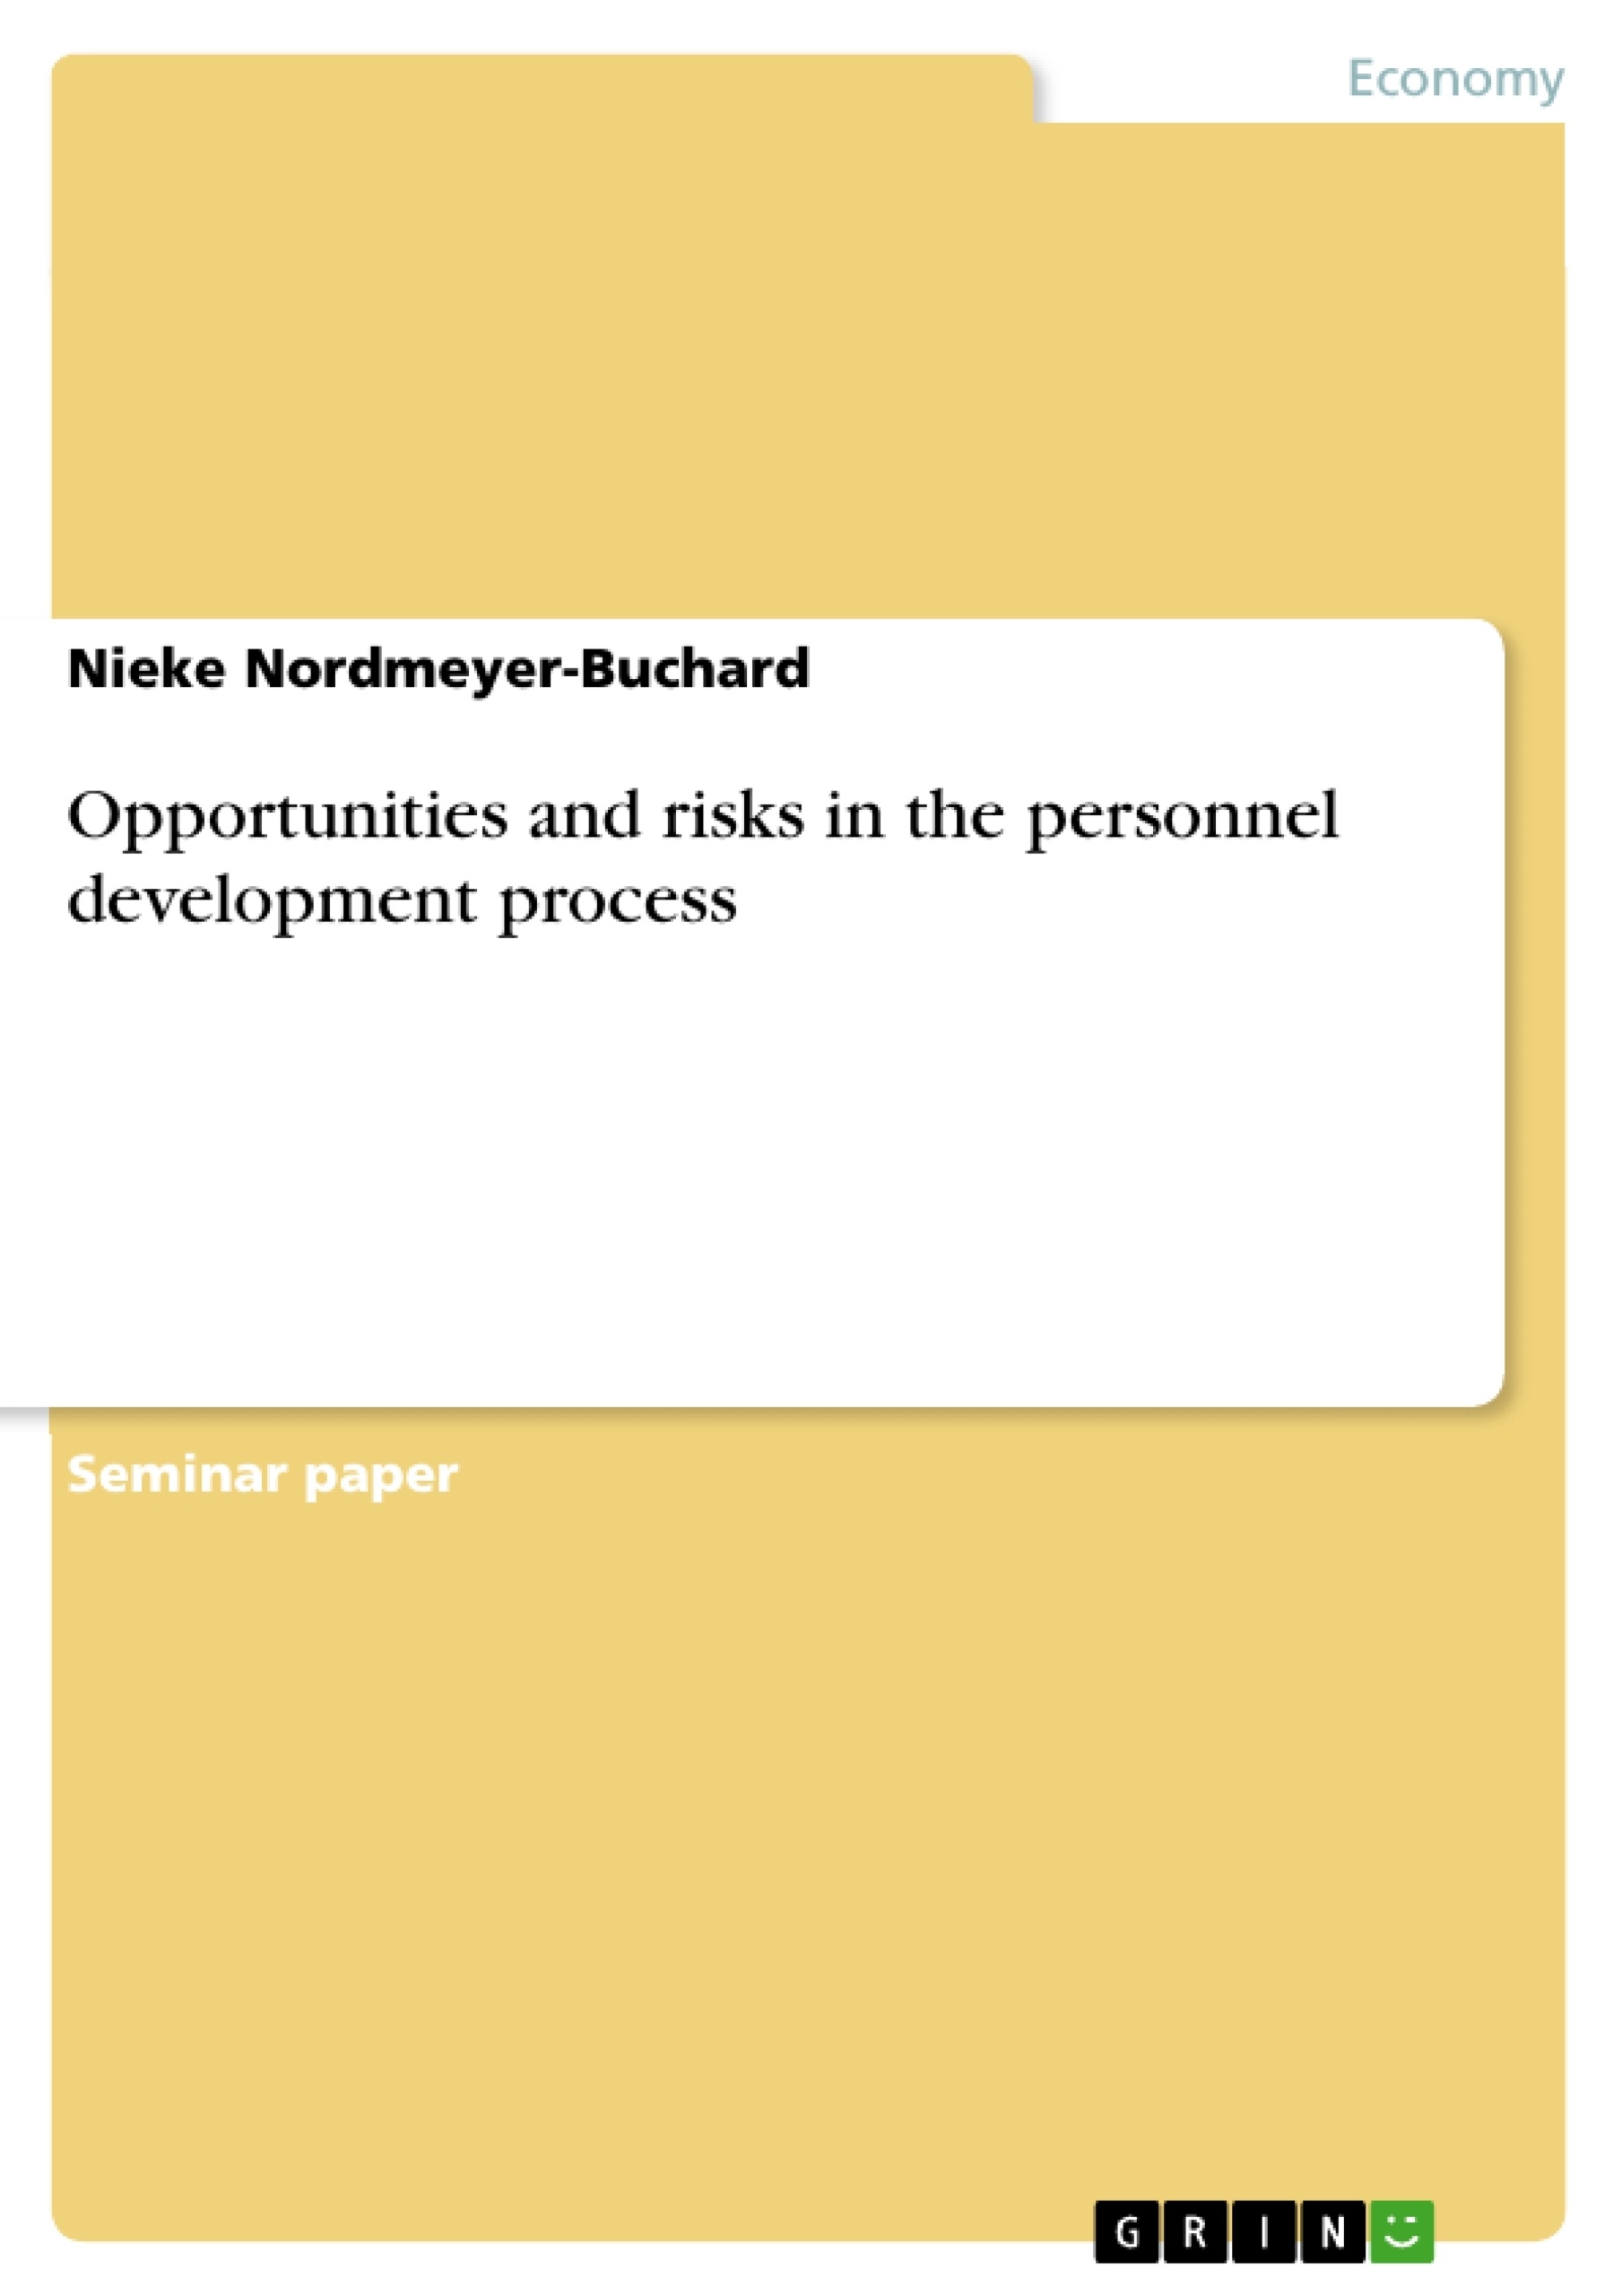 Title: Opportunities and risks in the personnel development process